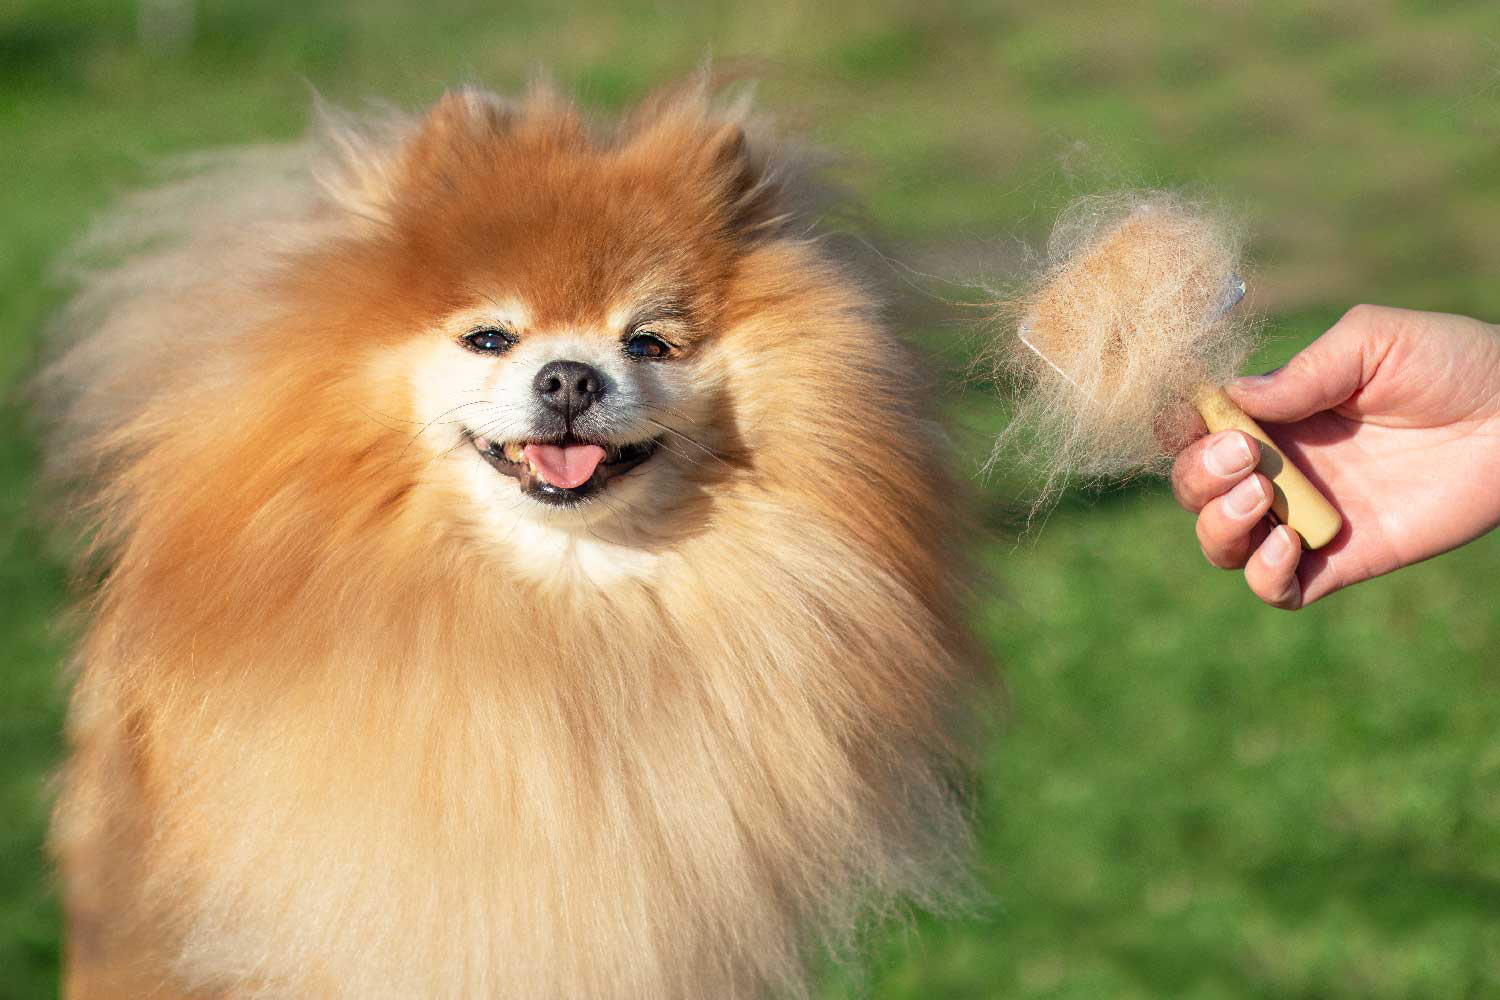 Dog with person holding some of its fur